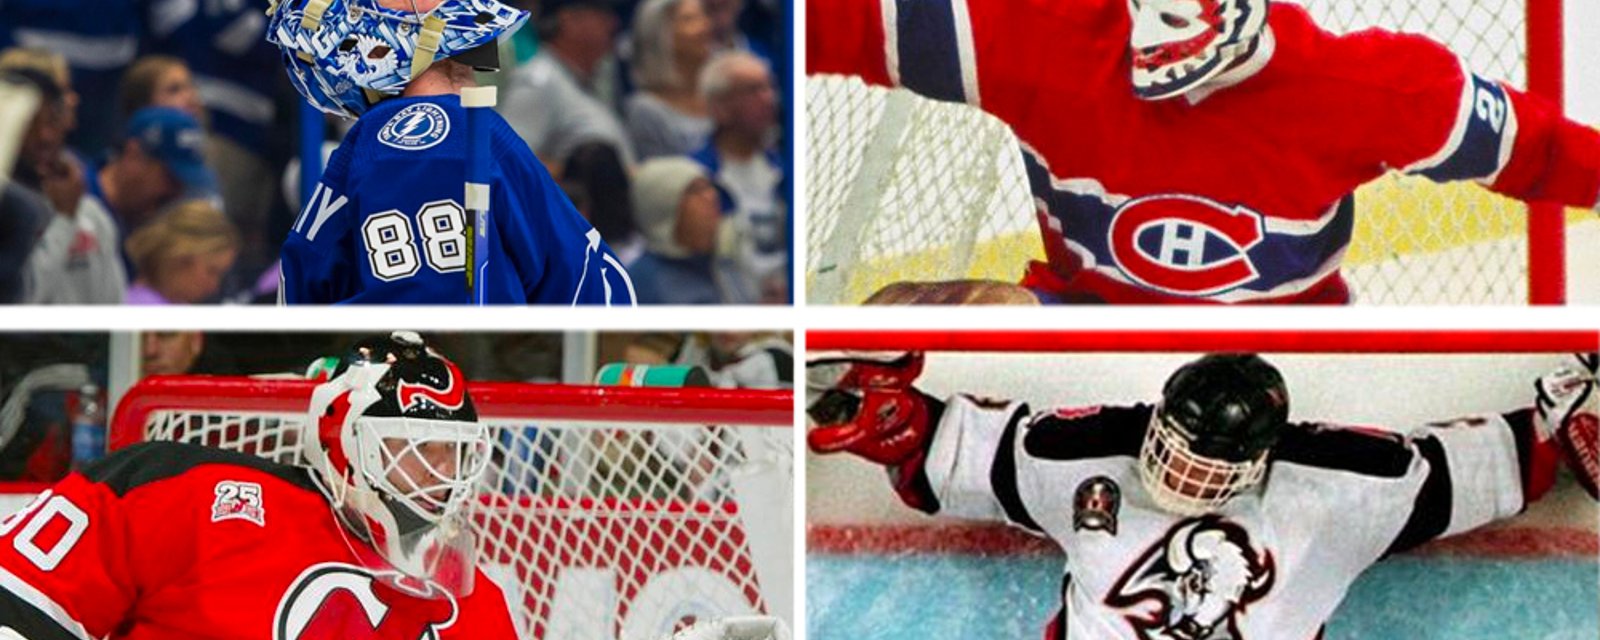 Brodeur, Dryden and Hasek all give credit to Vasilevsky as “one of the all-time greats”